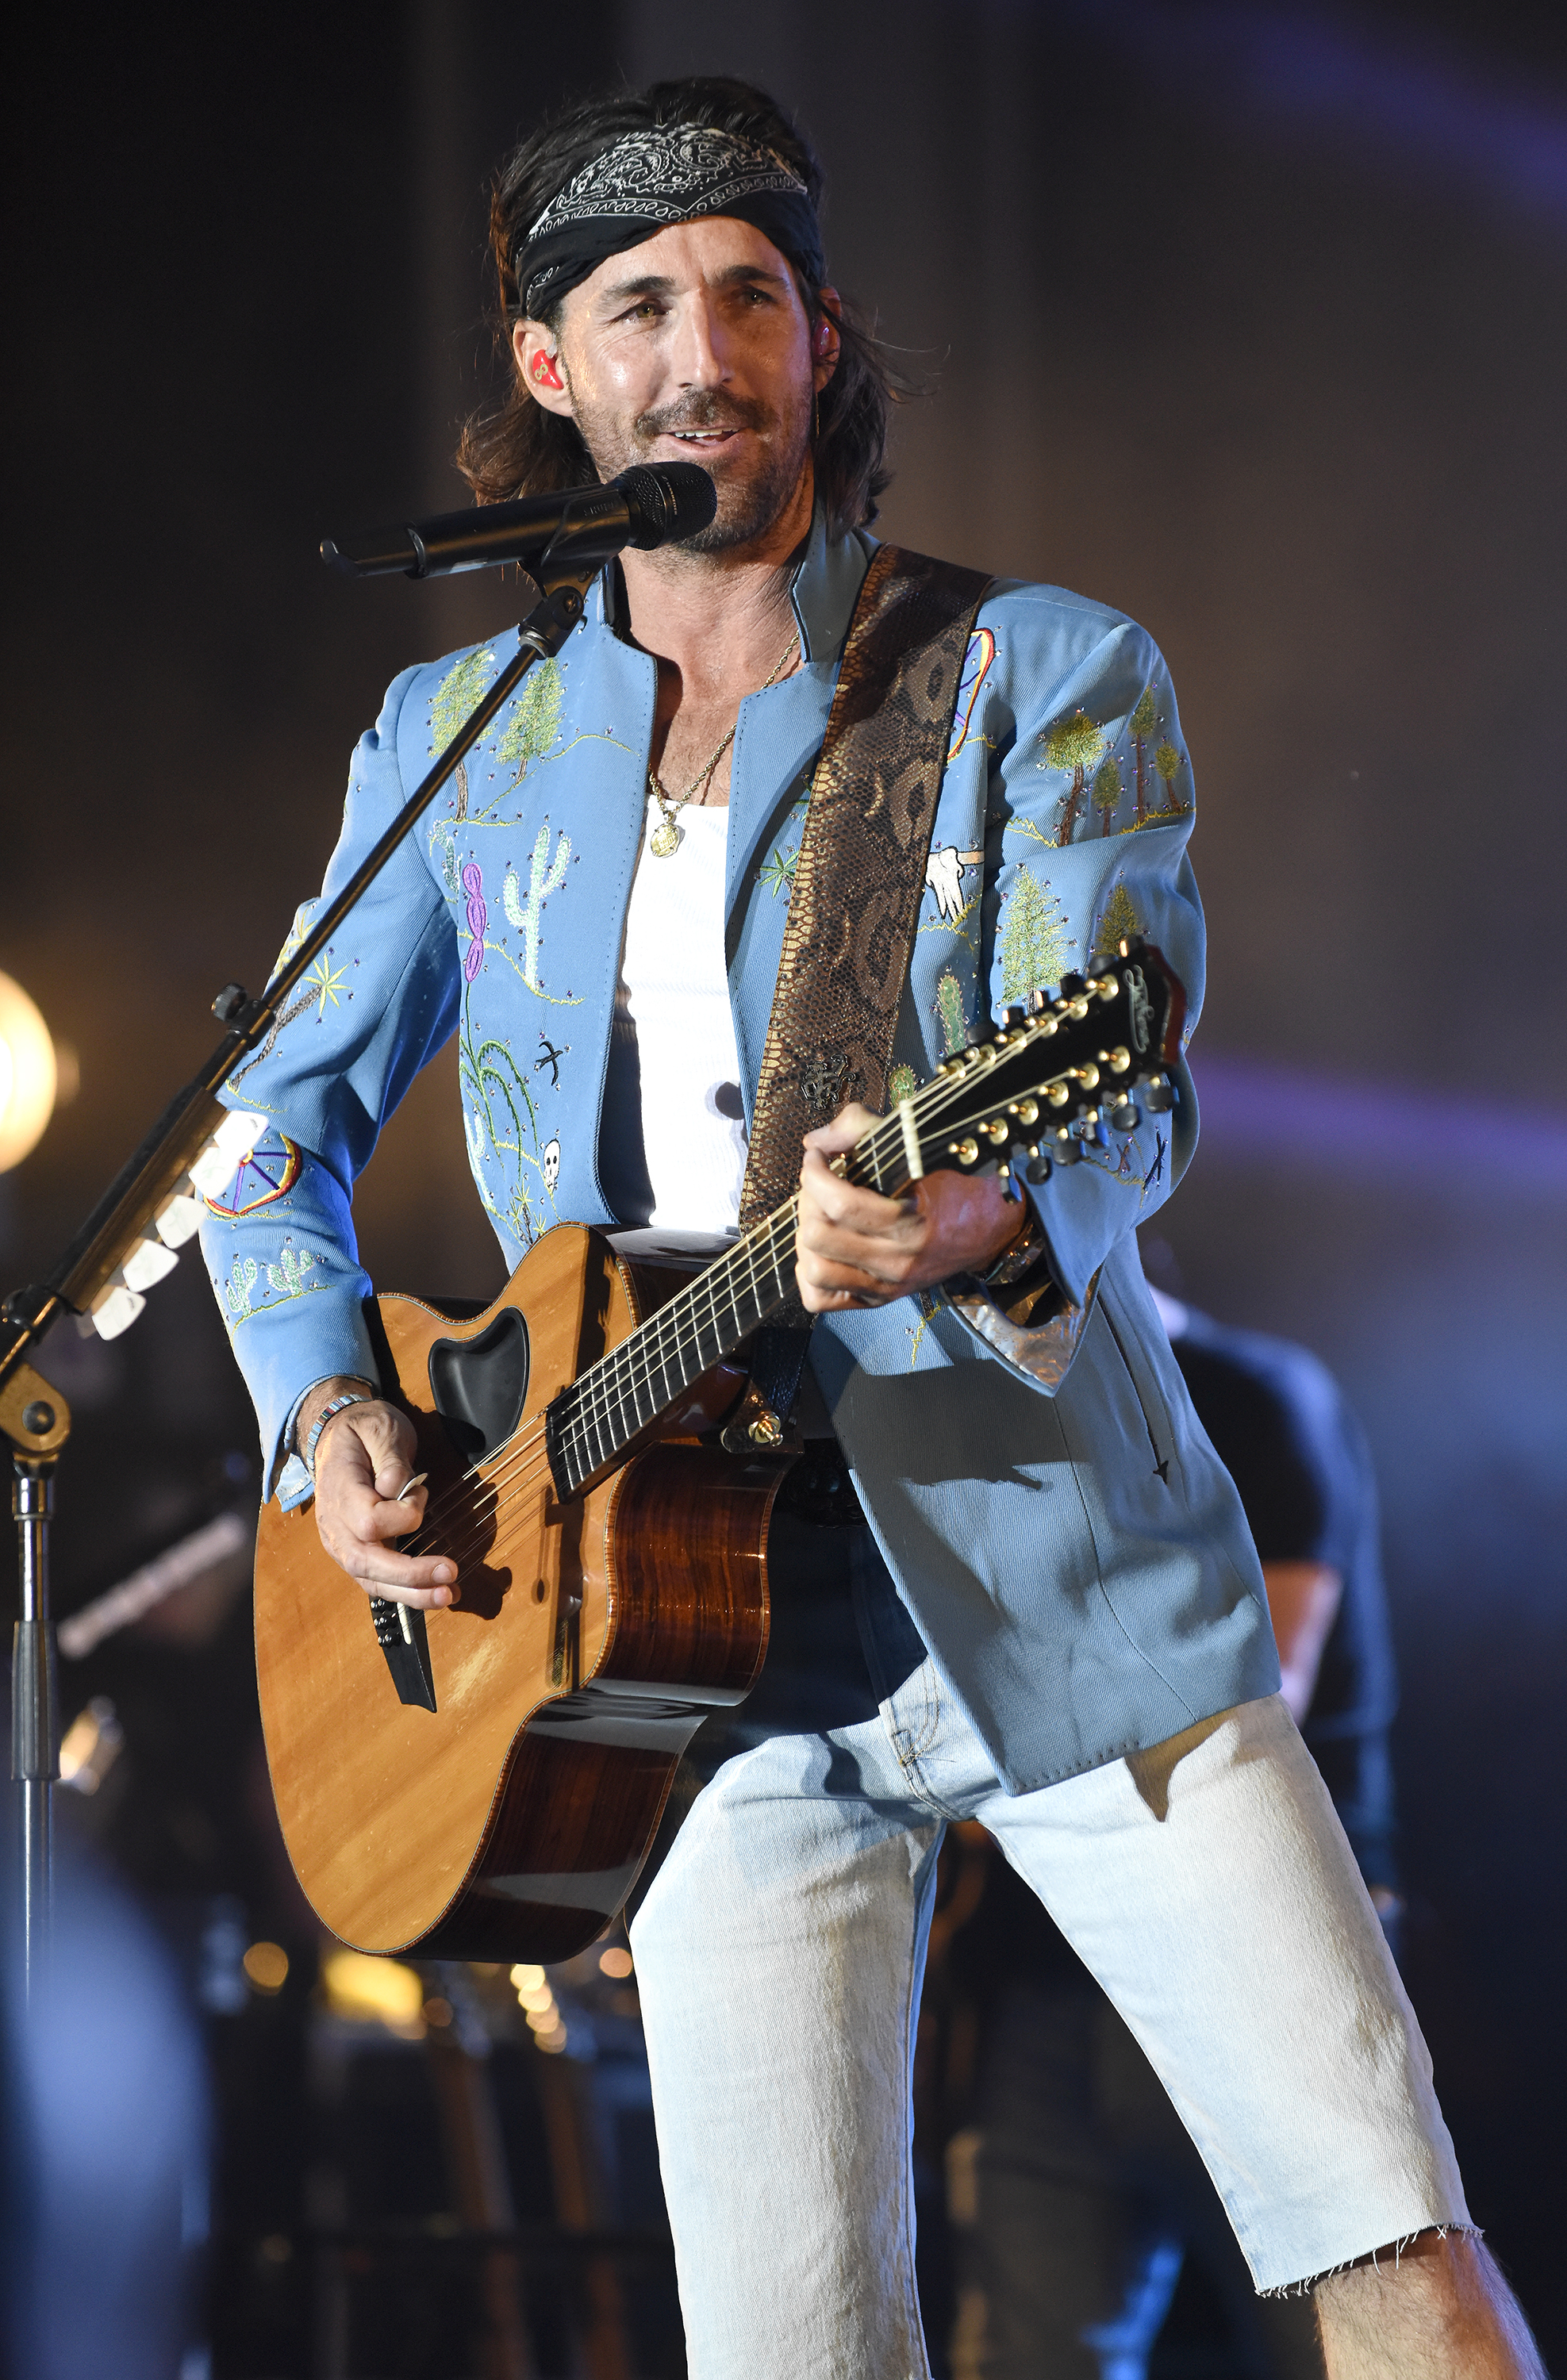 Jake Owen at The Fruit Yard Basi Insurance Nationwide Amphitheater on August 12, 2022, in California | Source: Getty Images